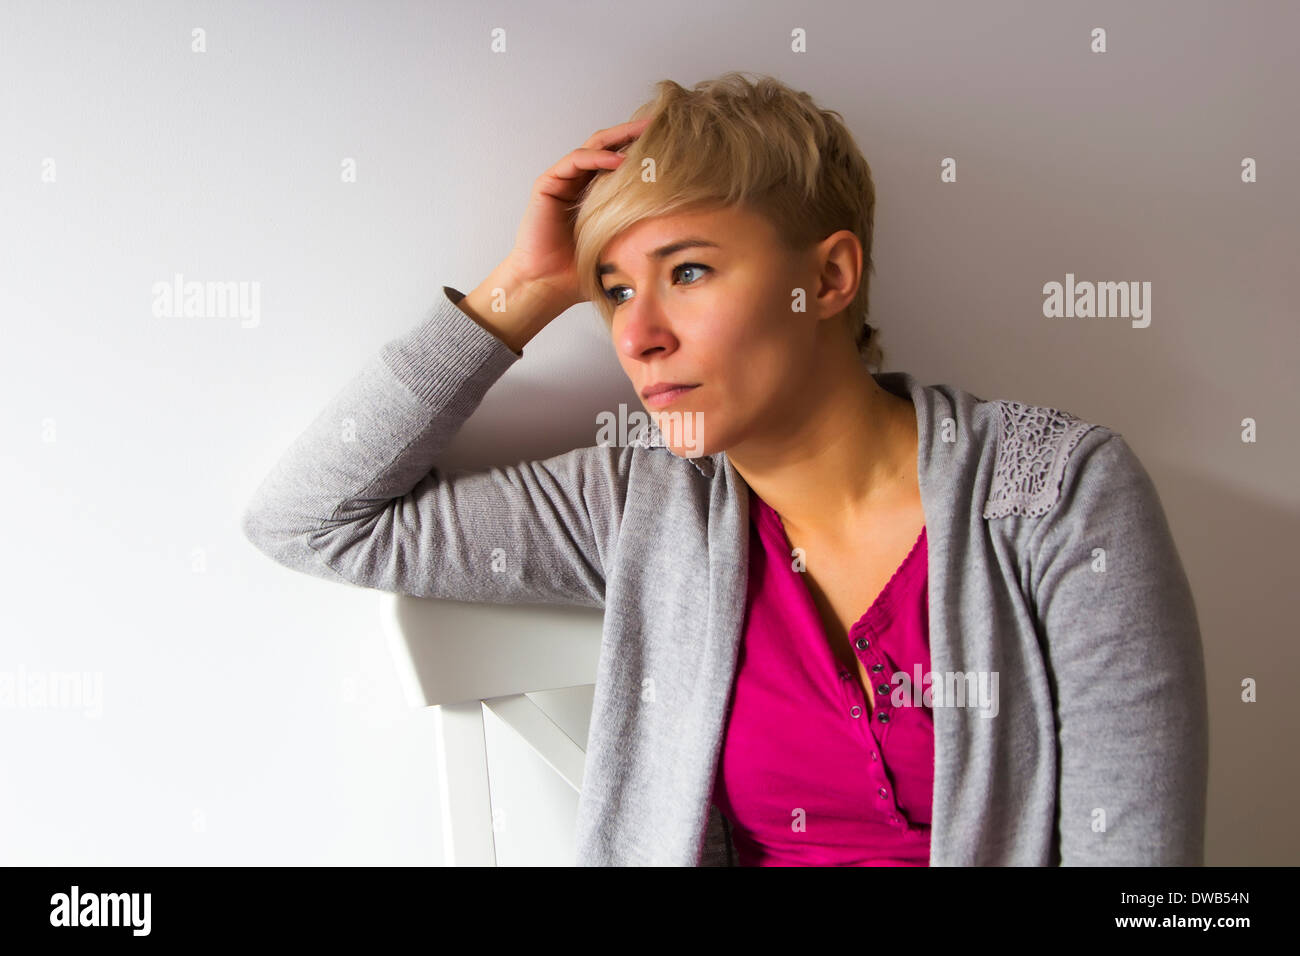 young woman with sad expression on her face Stock Photo